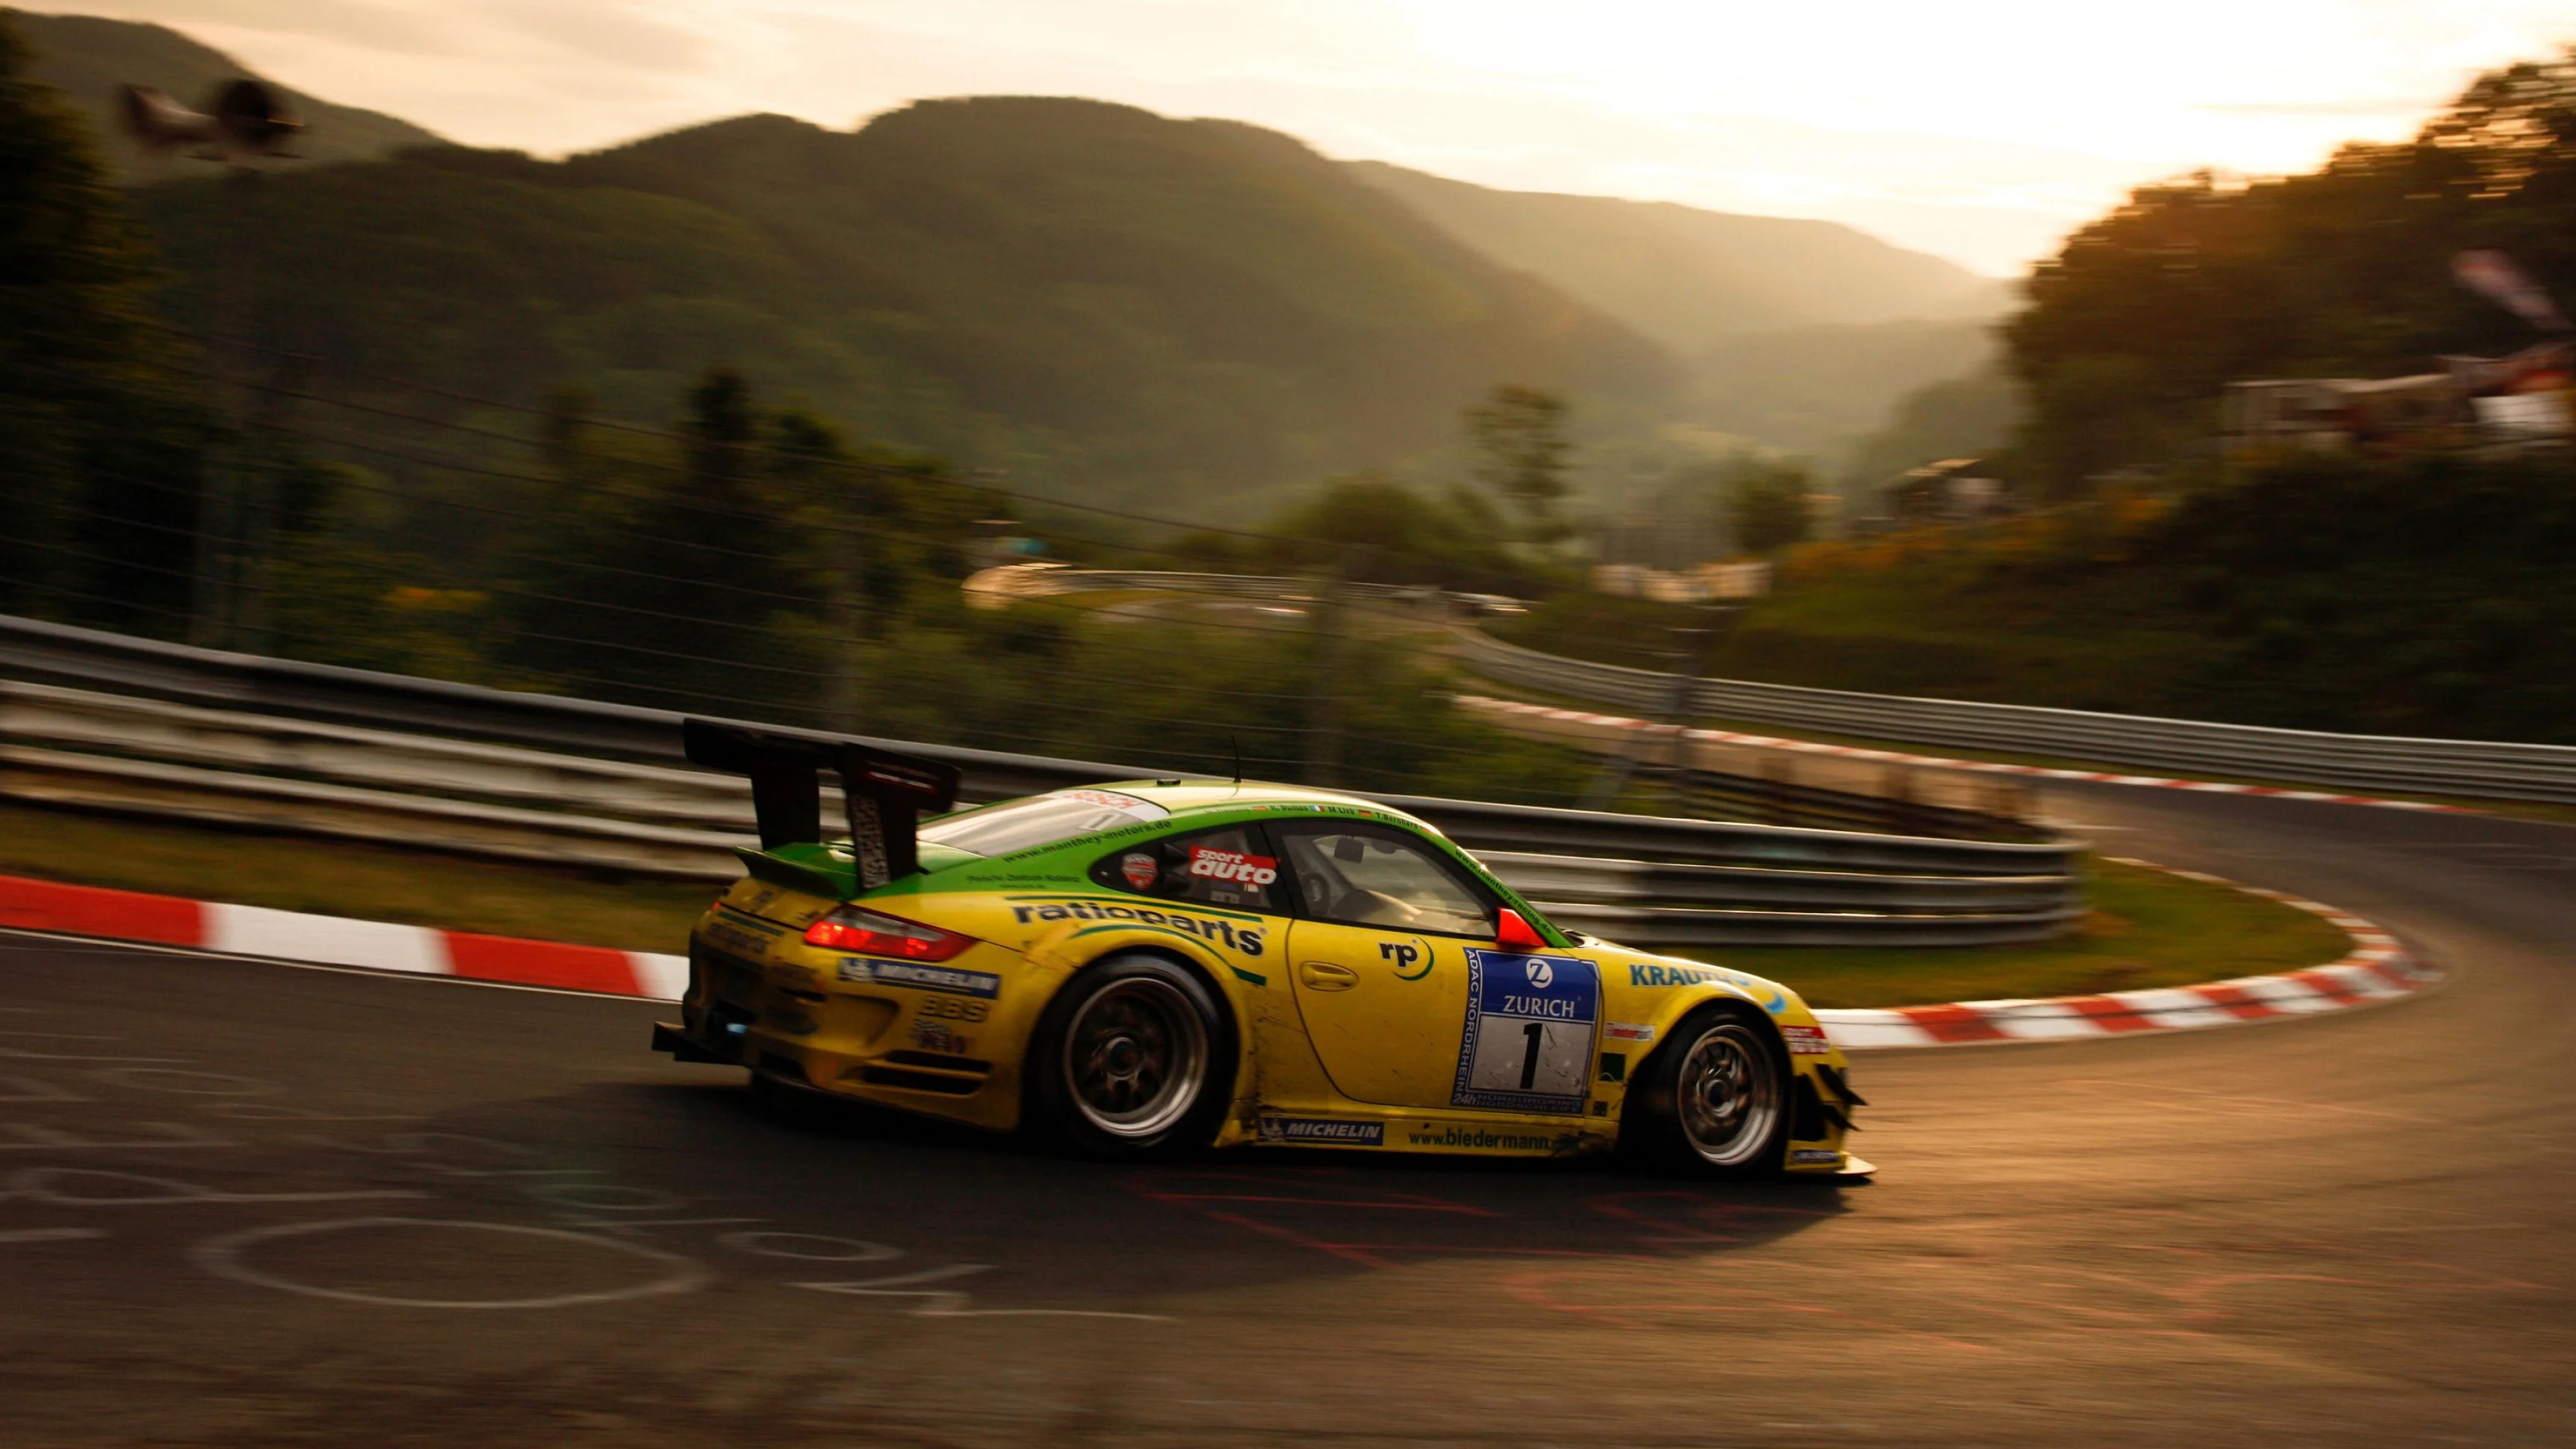 Motorsports: Michelin tires, Porsche 911 GT3 RS Turbo, A sports car designed for racing only. 3840x2160 4K Background.